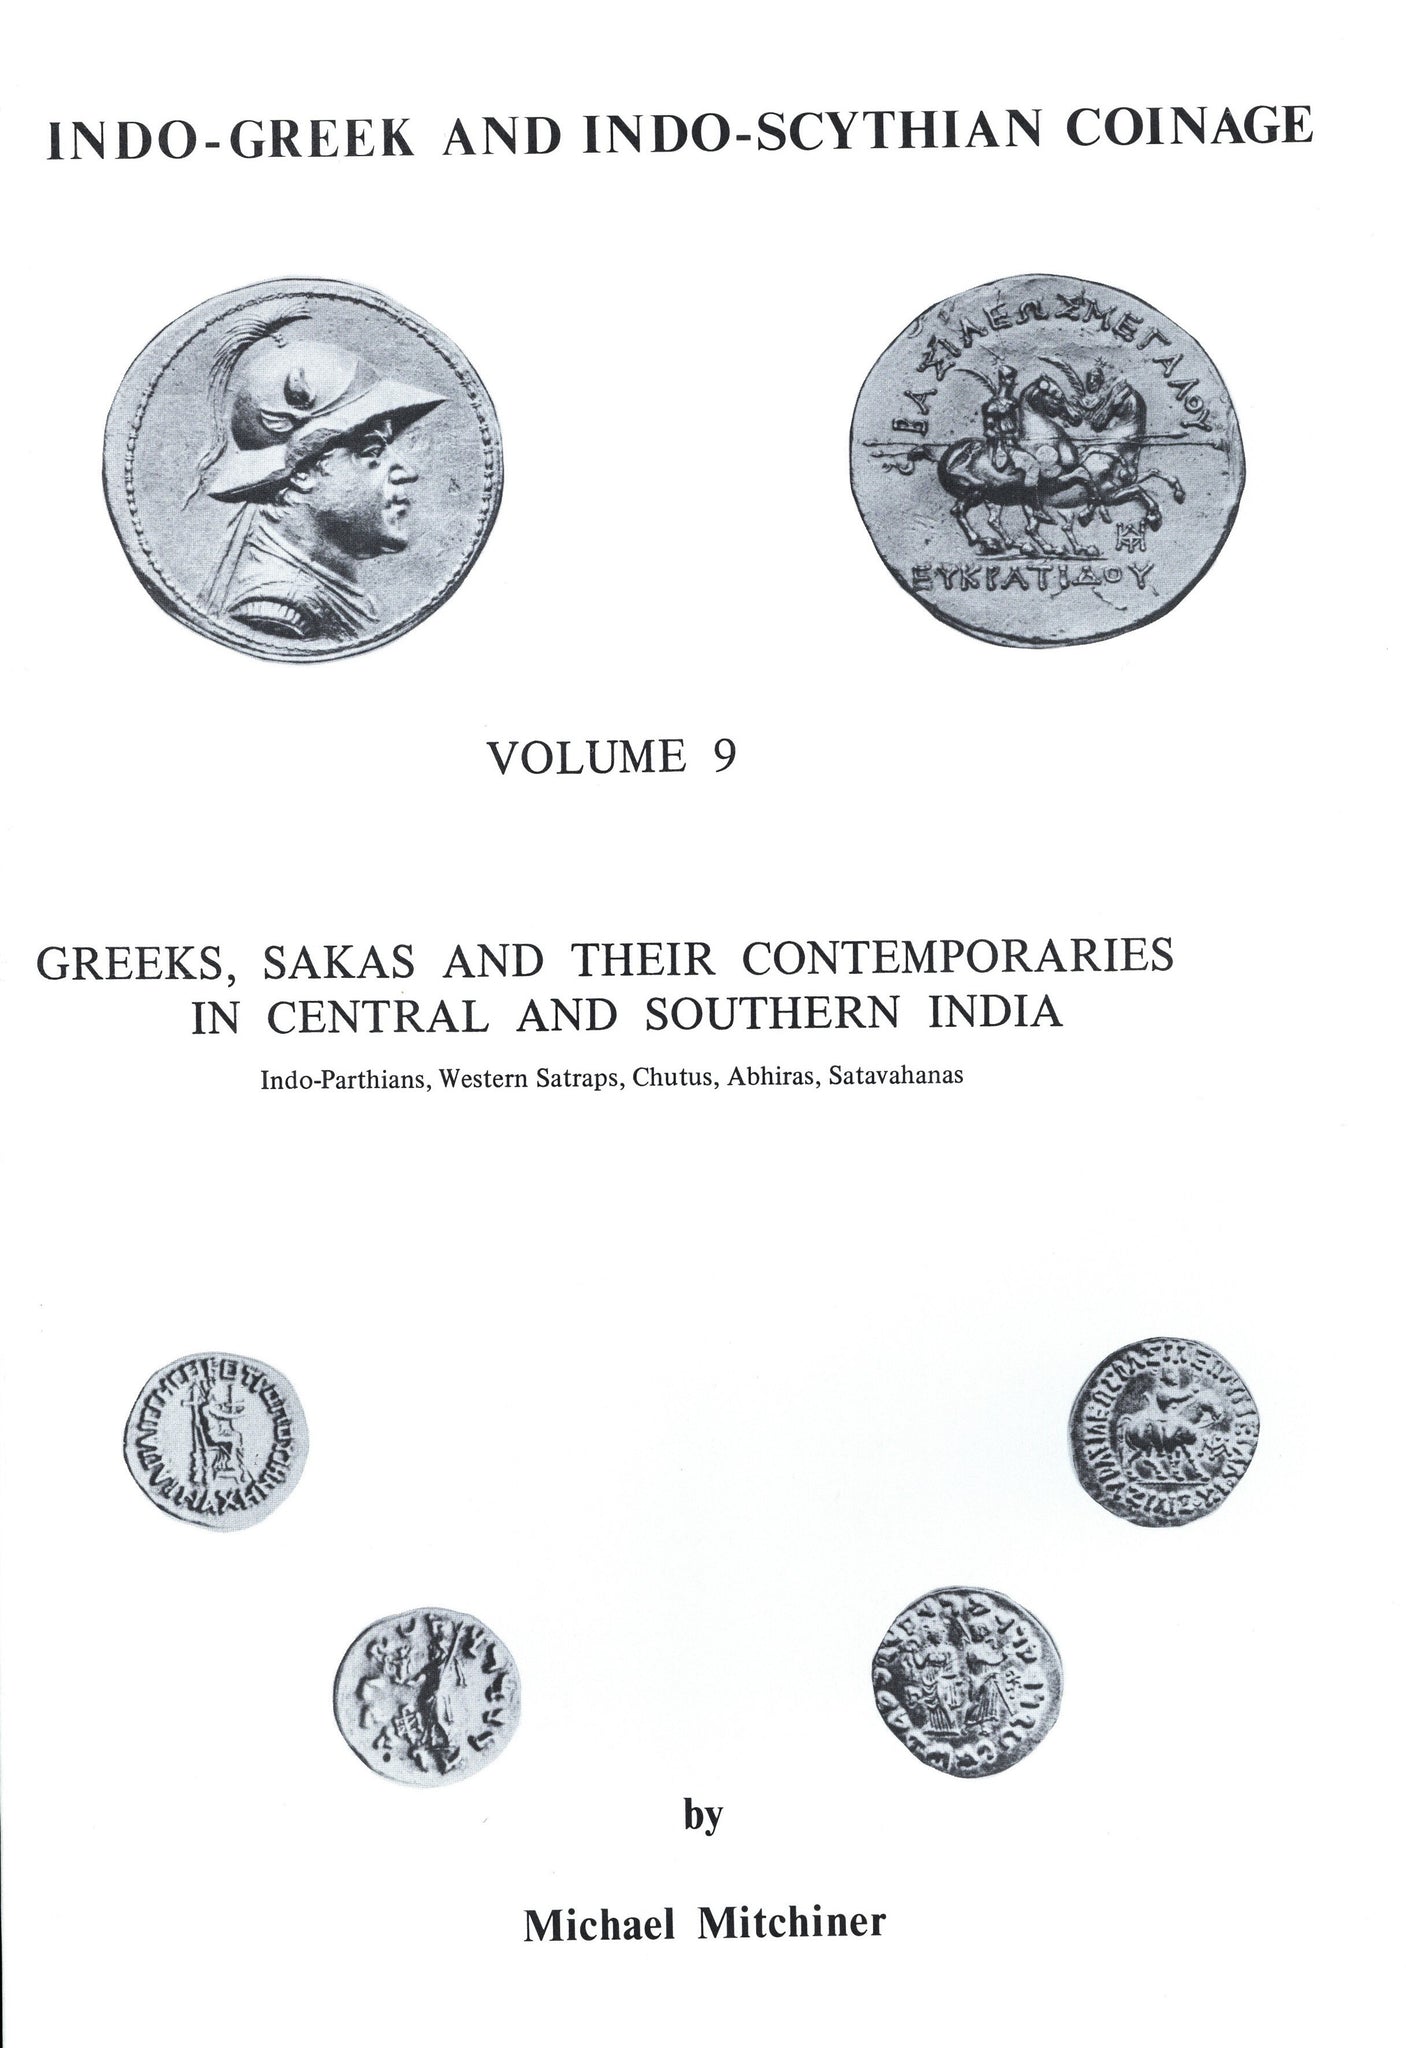 Indo-Greek and Indo-Scythian Coinage, volume 9: Greeks, Sakas and Their Contemporaries in Central and Southern India by Michael Mitchiner